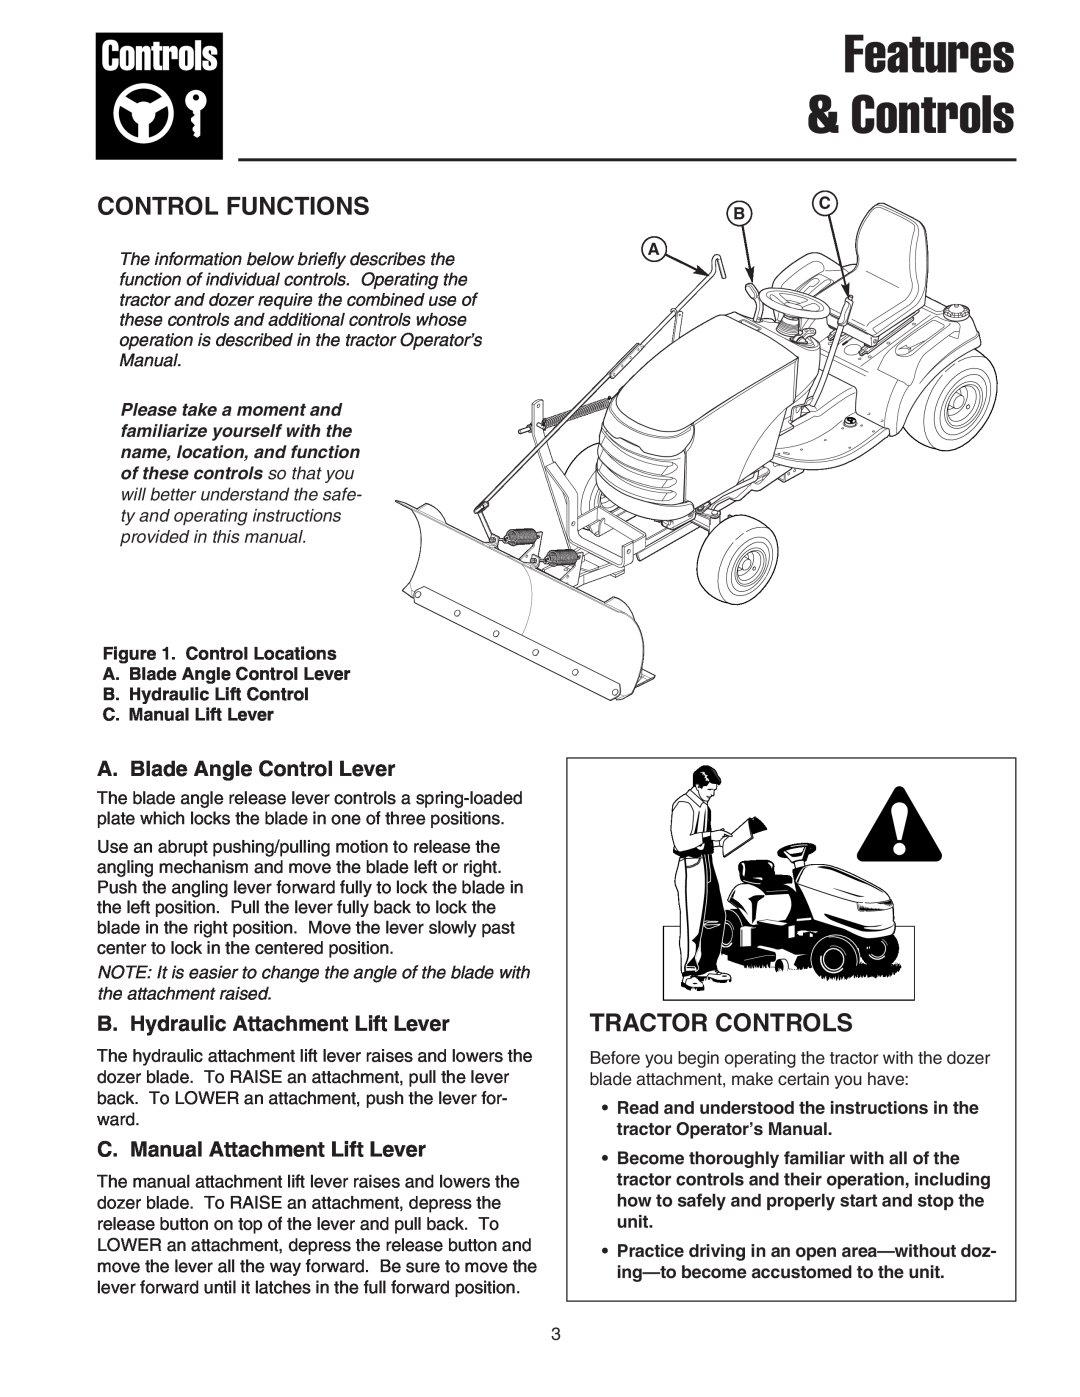 Snapper 1723445-02 Control Functions, Tractor Controls, A. Blade Angle Control Lever, B. Hydraulic Attachment Lift Lever 